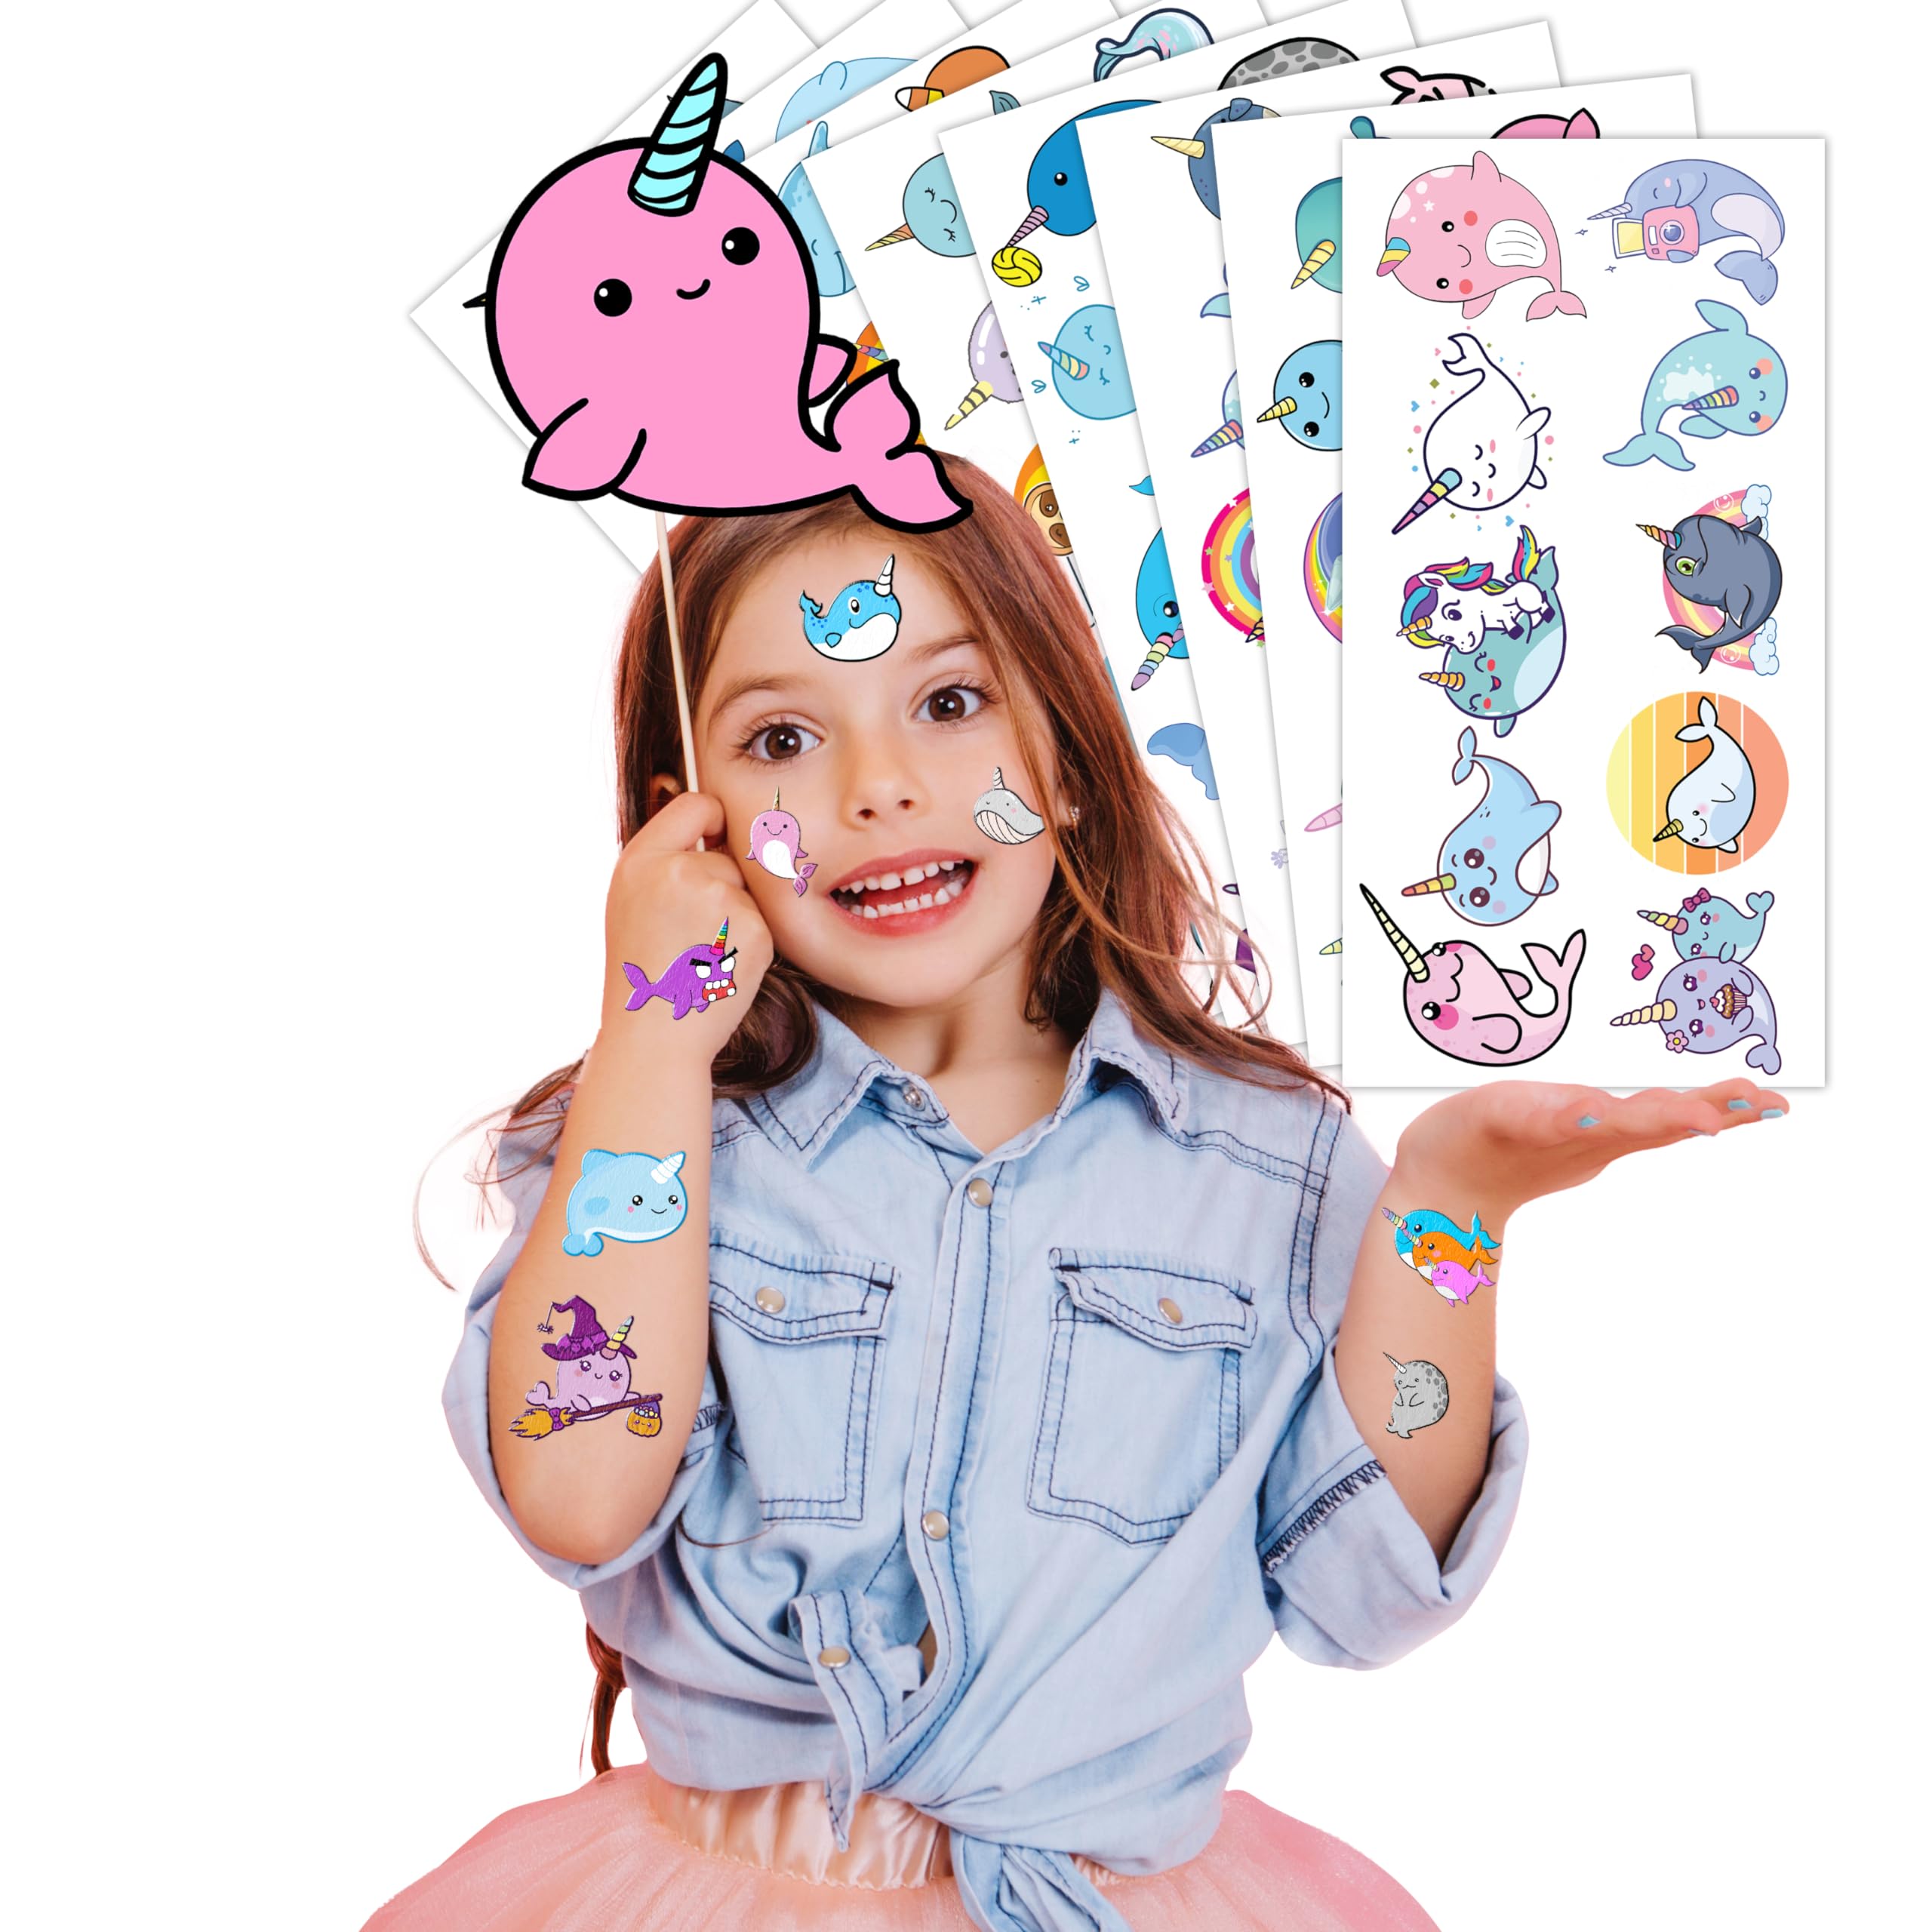 Narwhal Temporary Tattoos - Themed Whale Unicorn Birthday Party Supplies Decorations 96PCS Tattoos Stickers Party Favors Animal Fun Super Cute Kids Girls Boys Gifts Classroom School Prizes Christmas